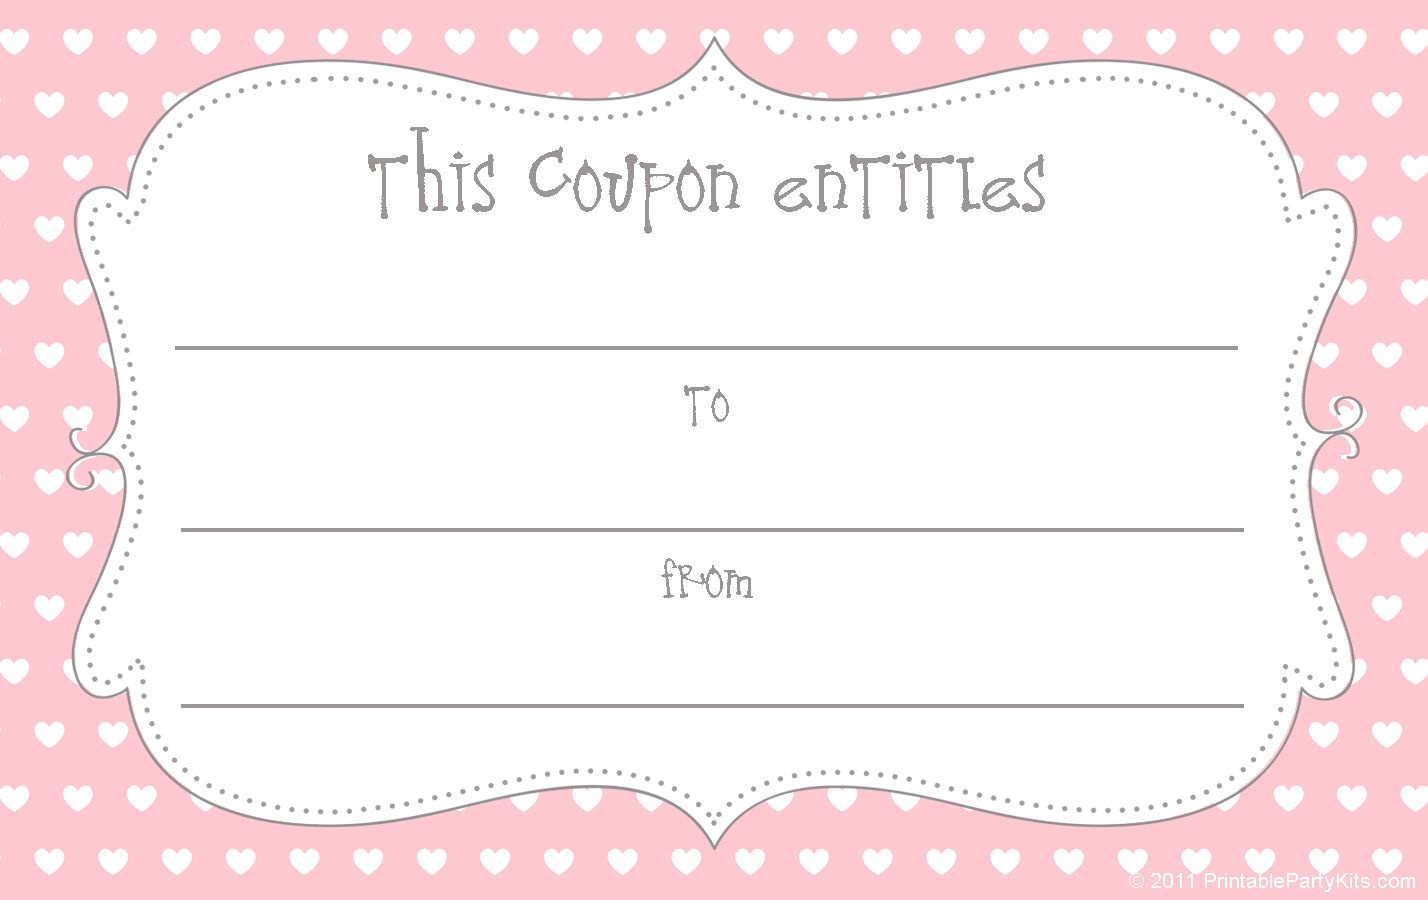 15 Sets Of Free Printable Love Coupons And Templates - Free Sample Coupons Printable